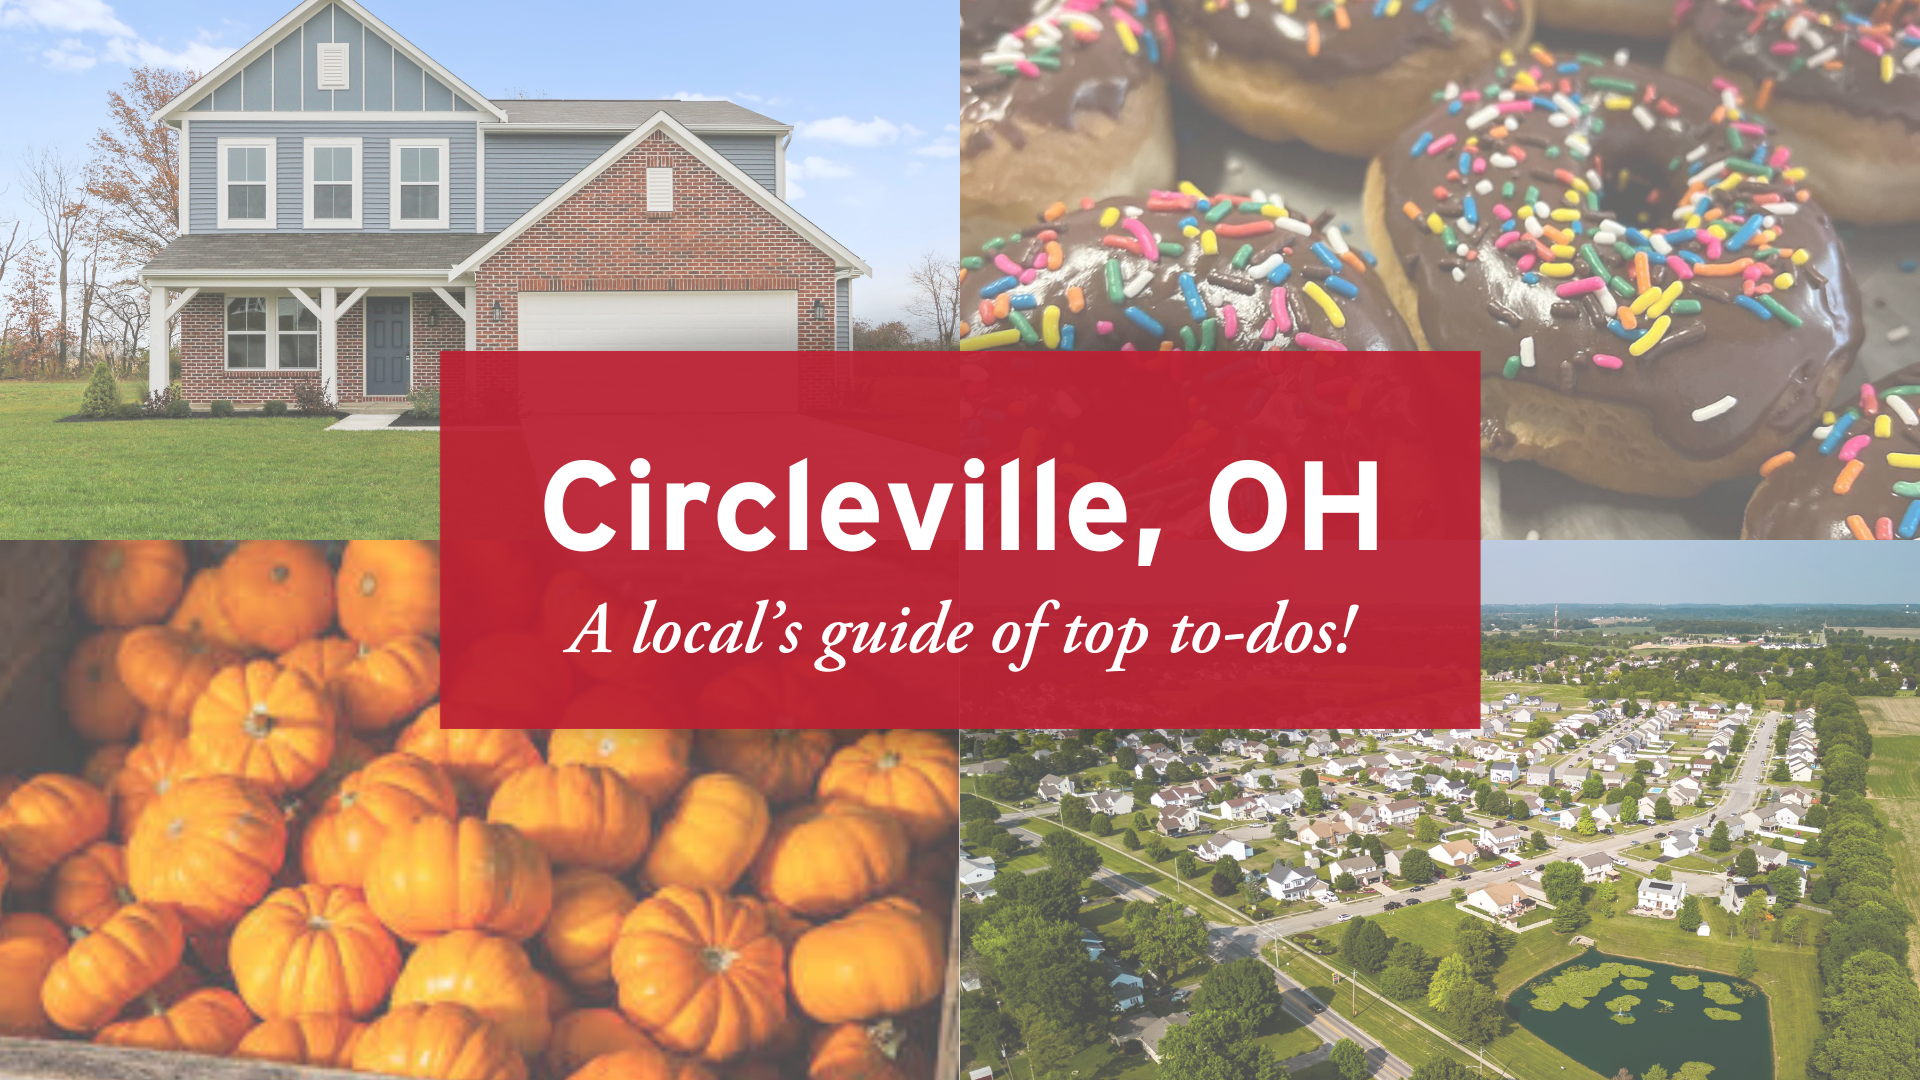 Venturing Circleville: A Local's Guide of Top To-Dos